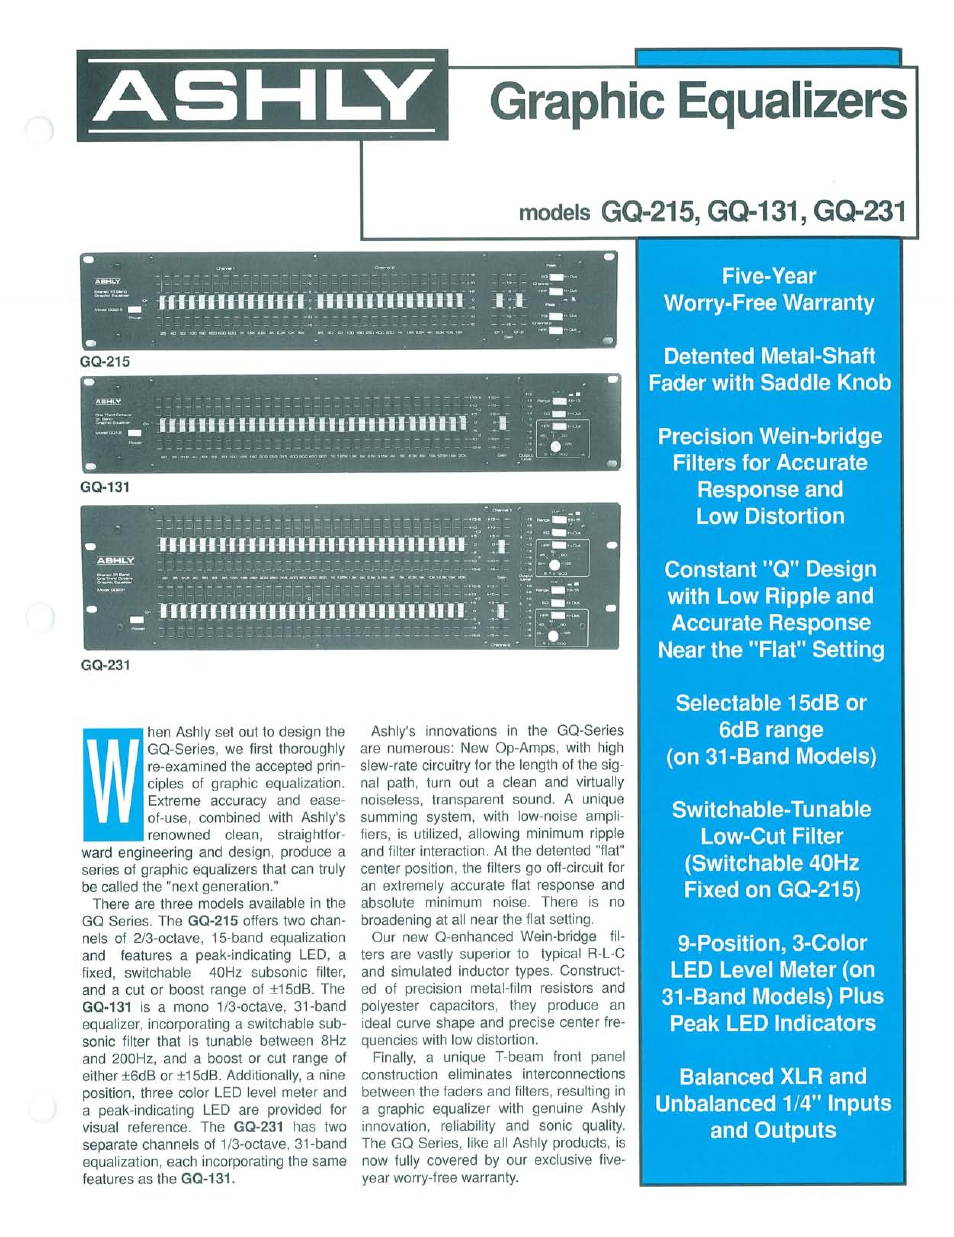 Graphic Equalizers GQ-131